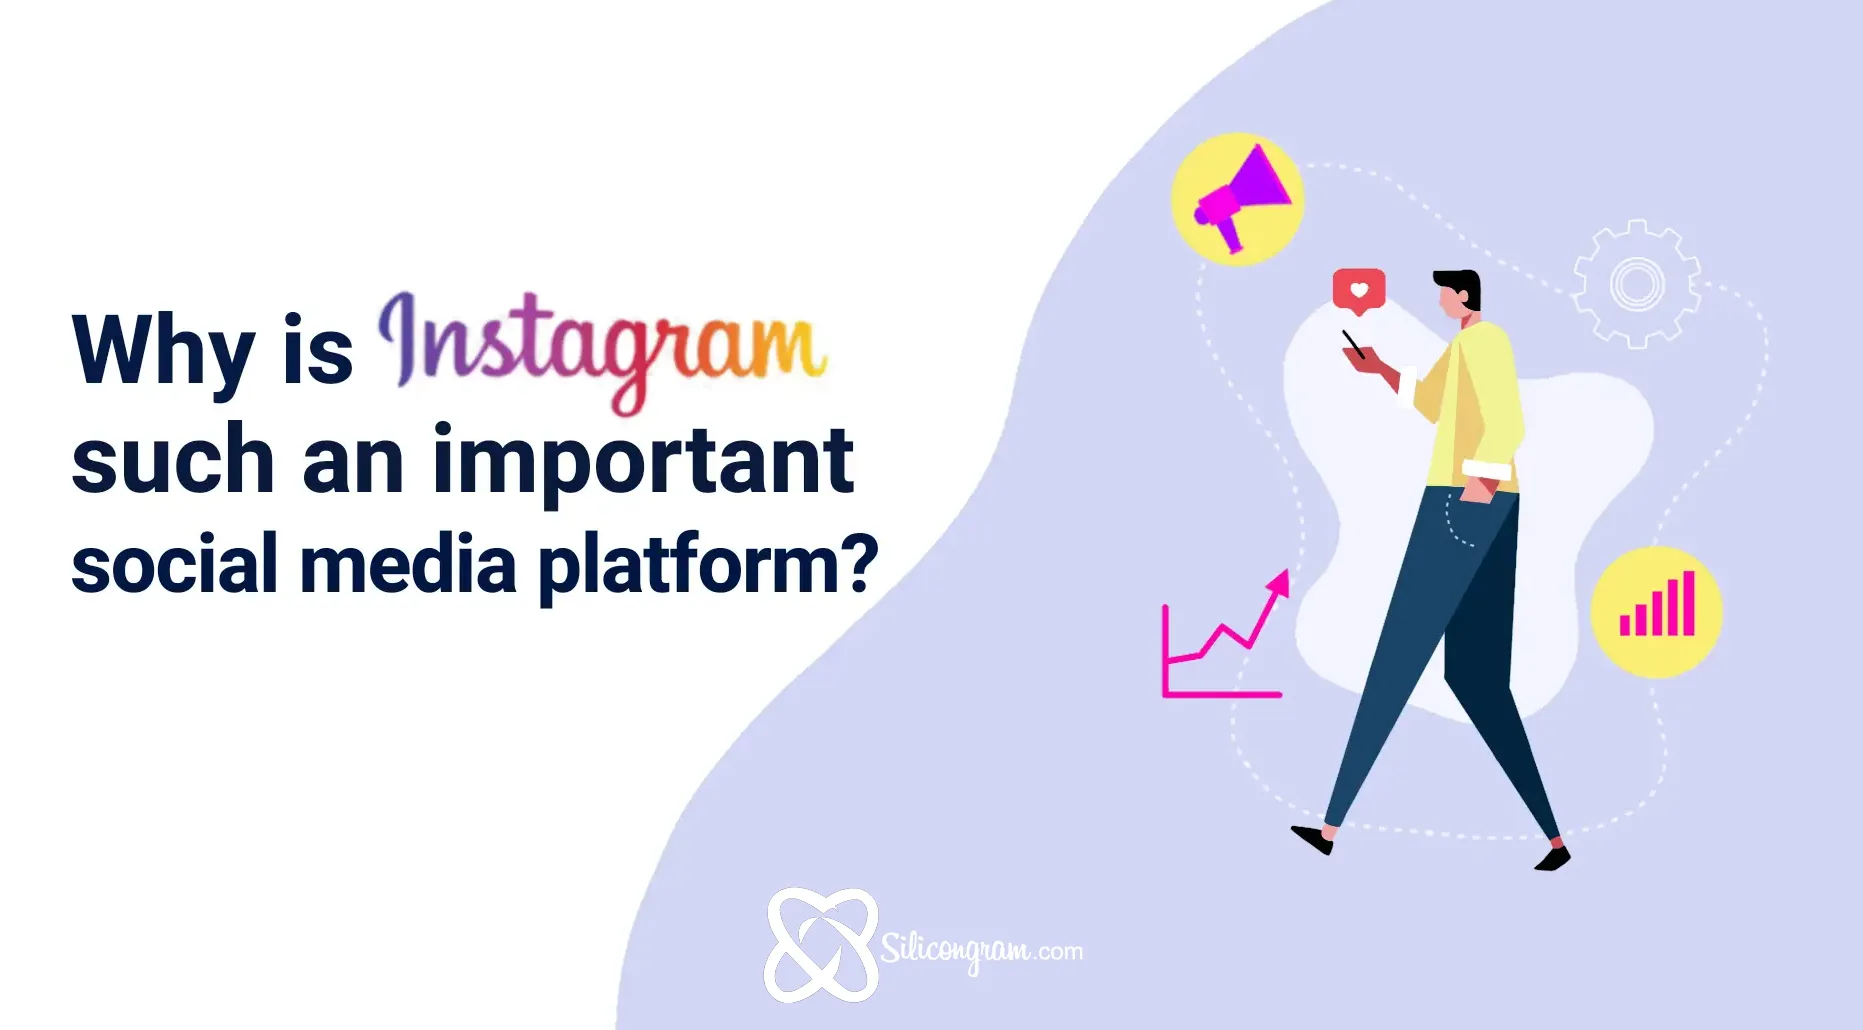 Brief overview of the importance of Instagram as a social media platform
why is instagram such an important social media platform
Mastering Instagram Growth: Strategies for Enhancing Your Follower Count